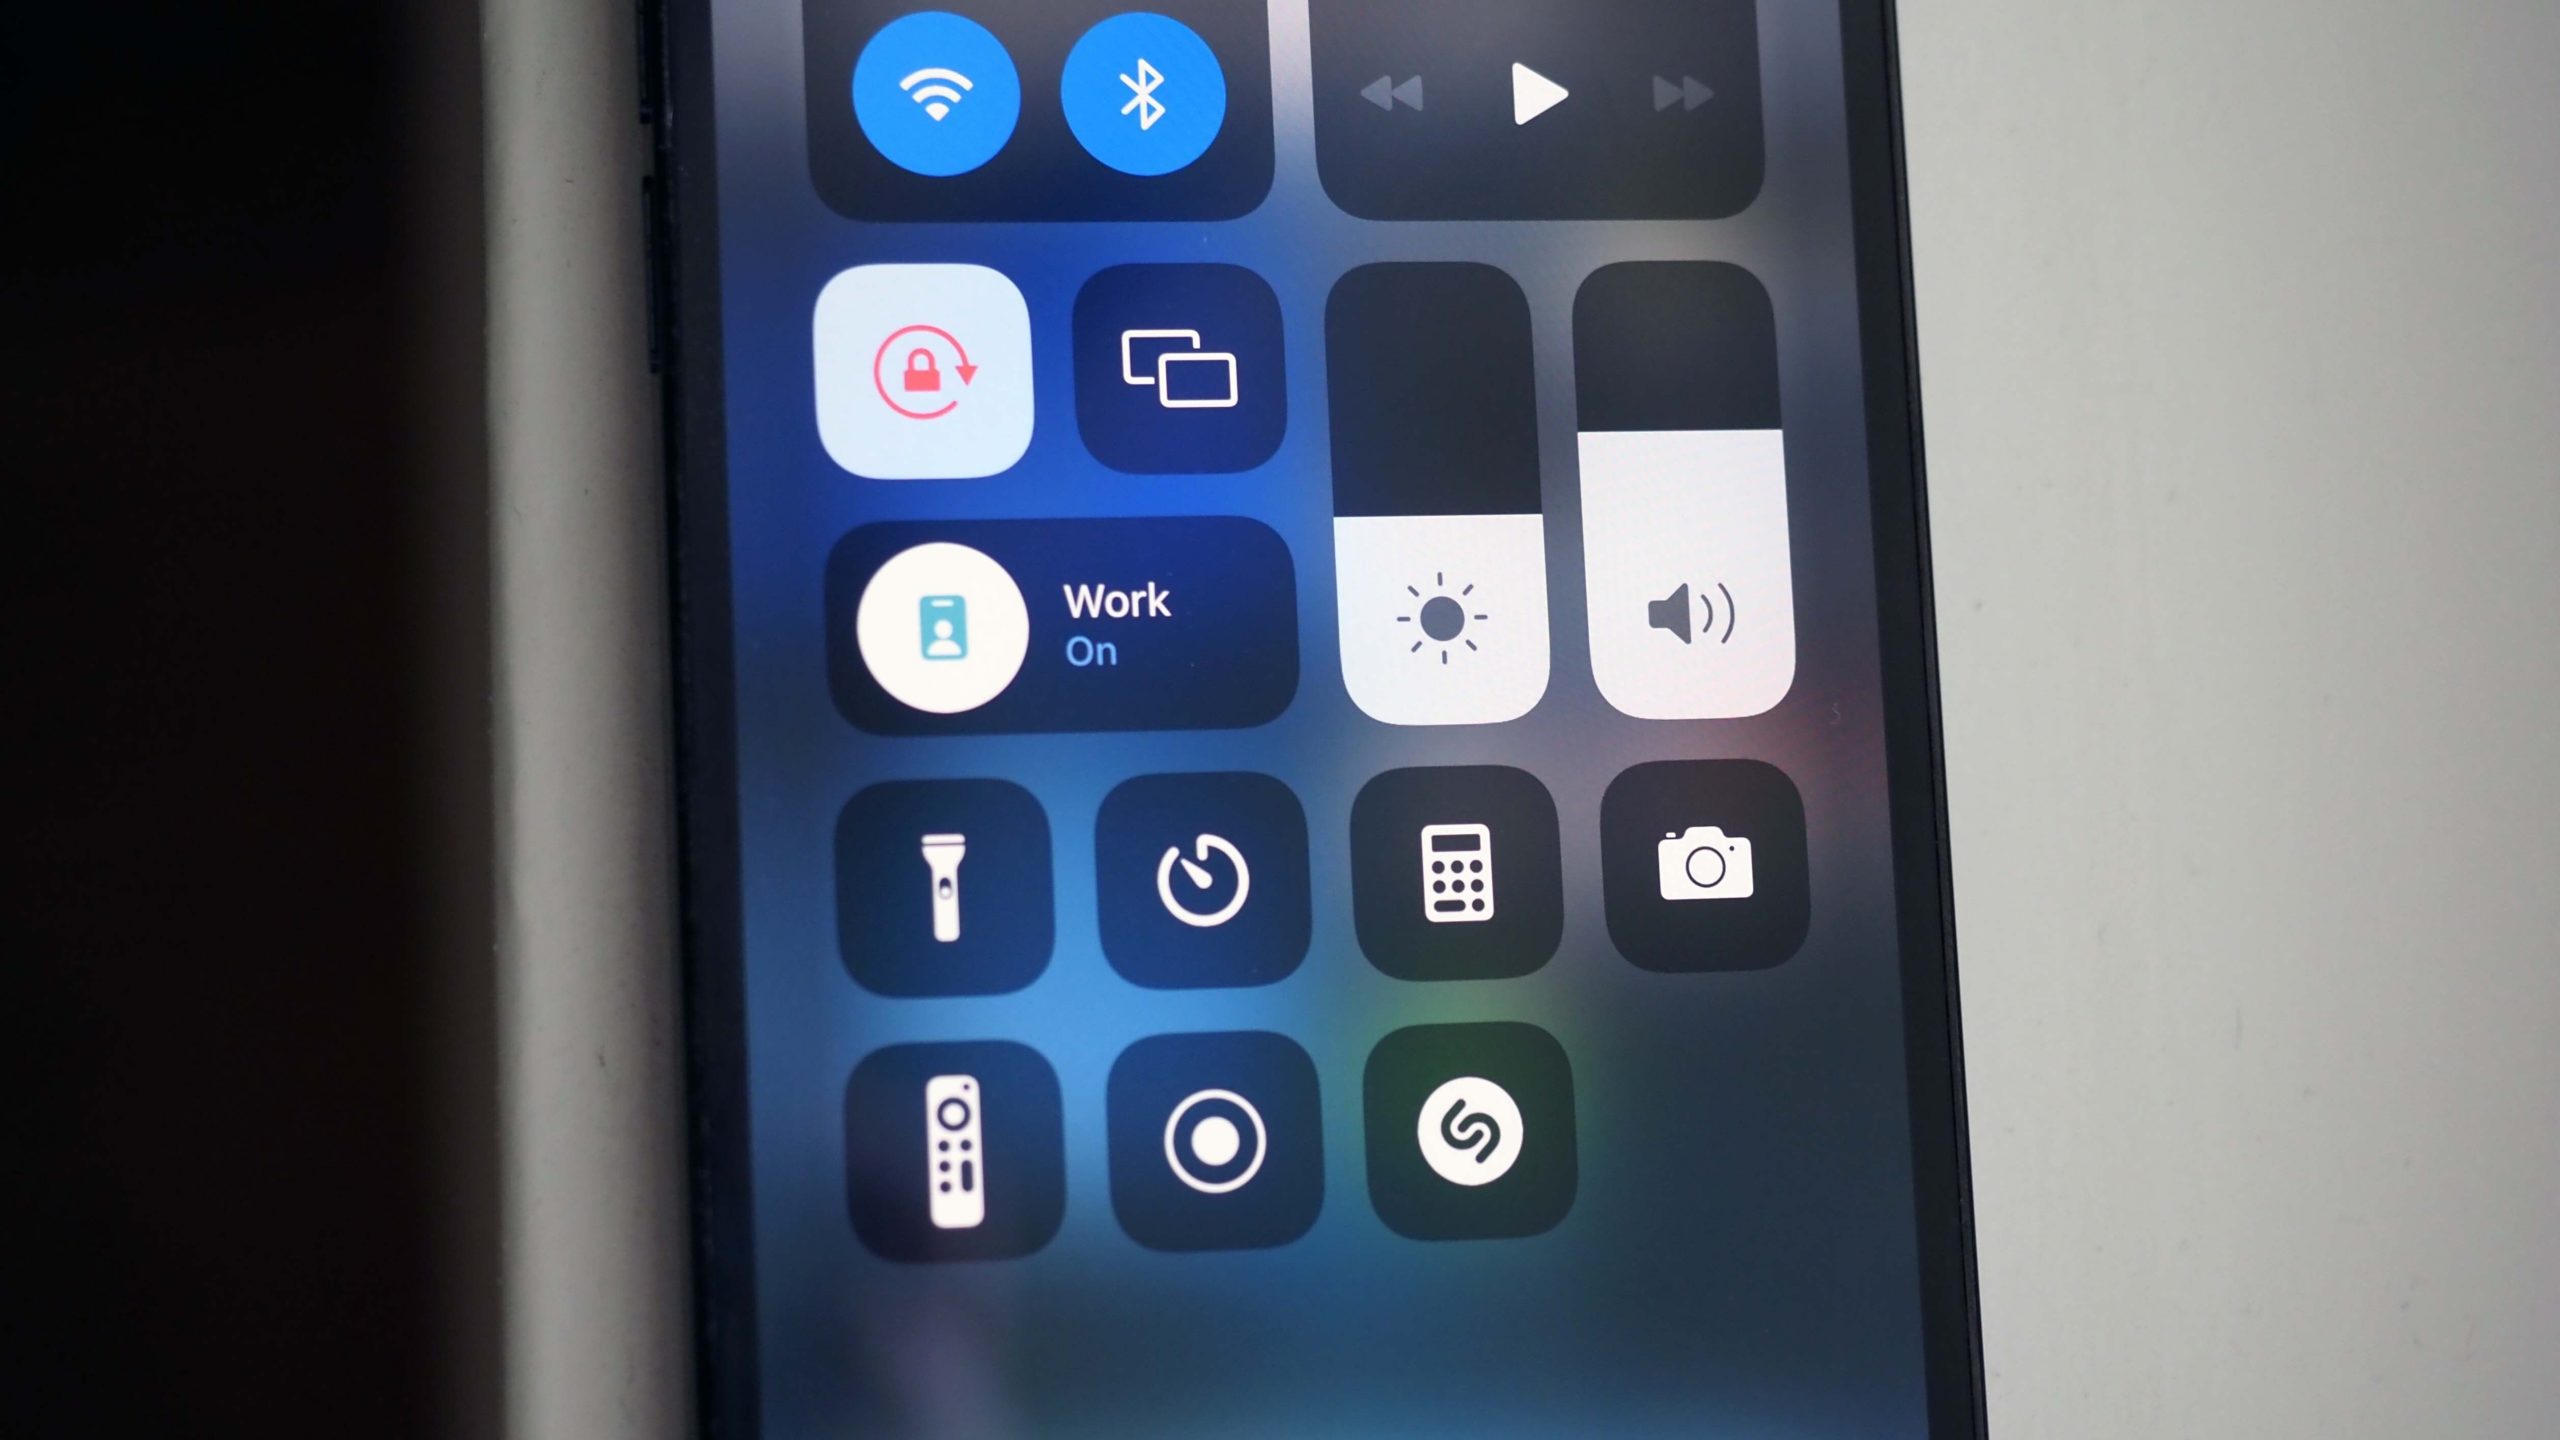 You can access Focus by swiping down from Control Centre. (Photo: Caitlin McGarry/Gizmodo)